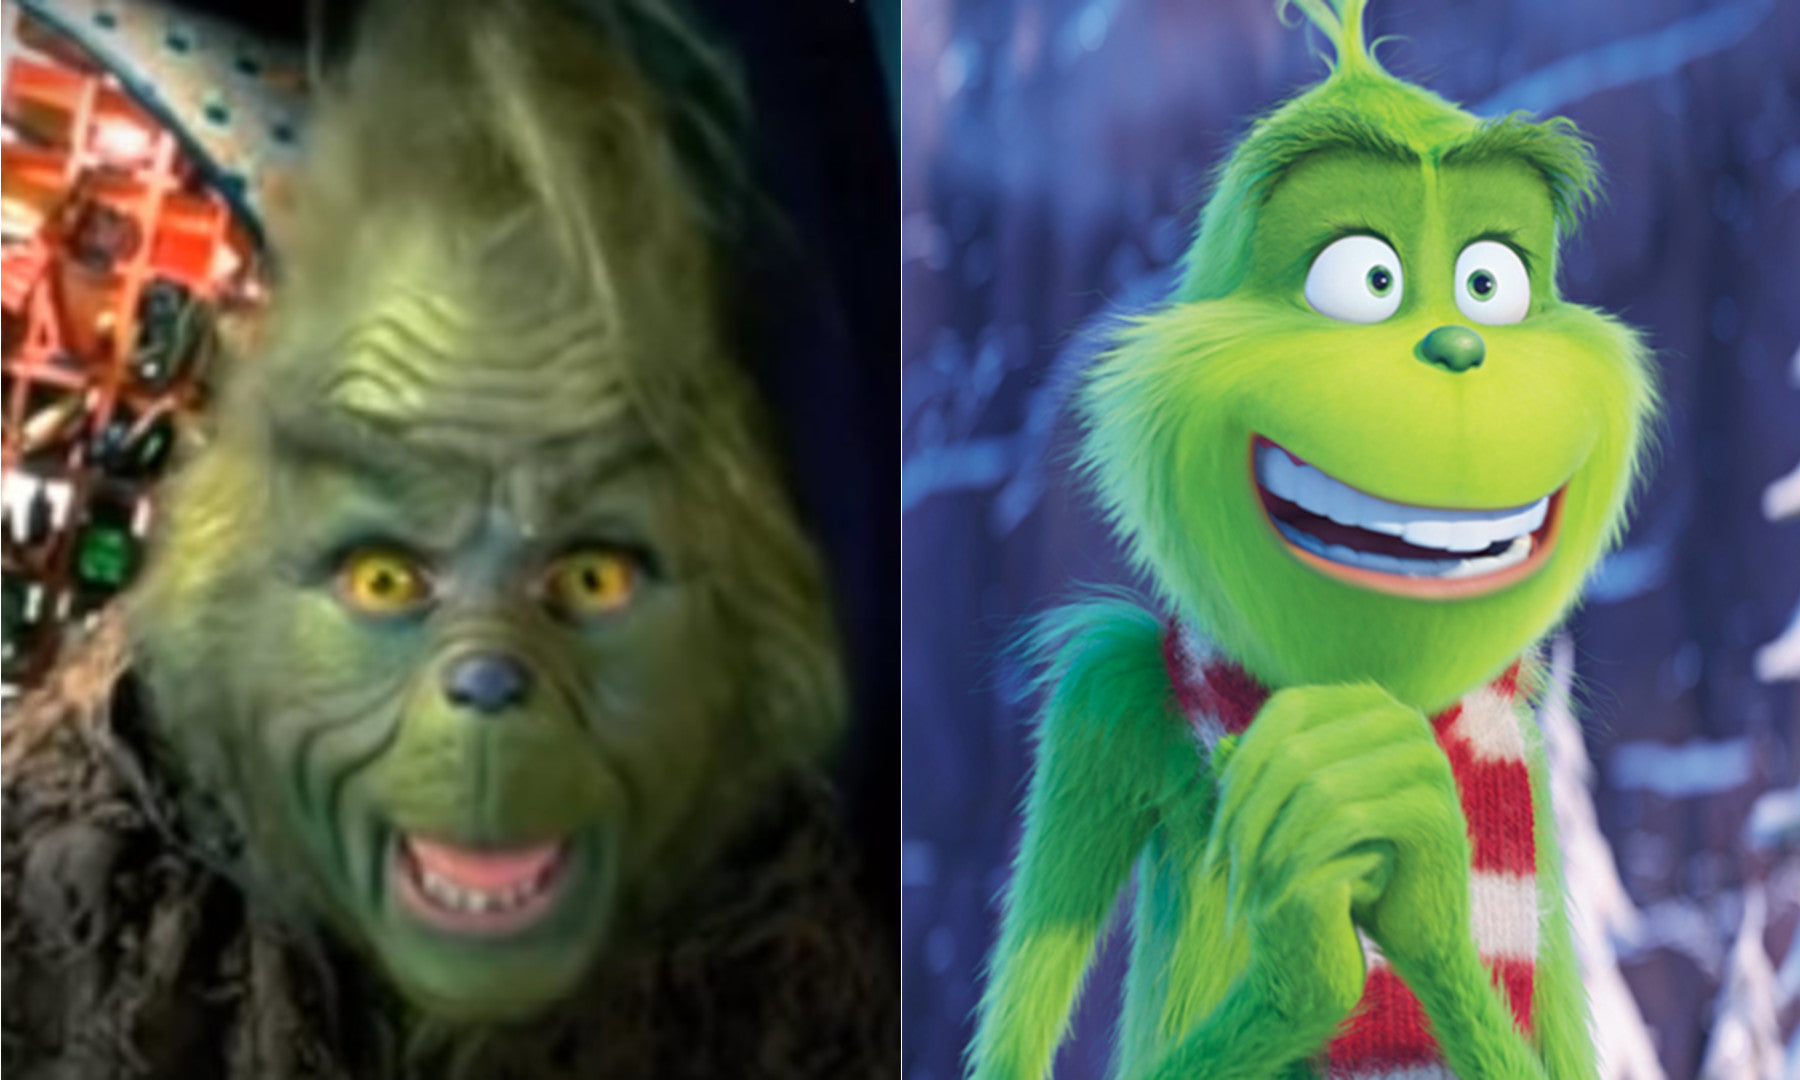 How The Grinch stole Christmas holiday movie